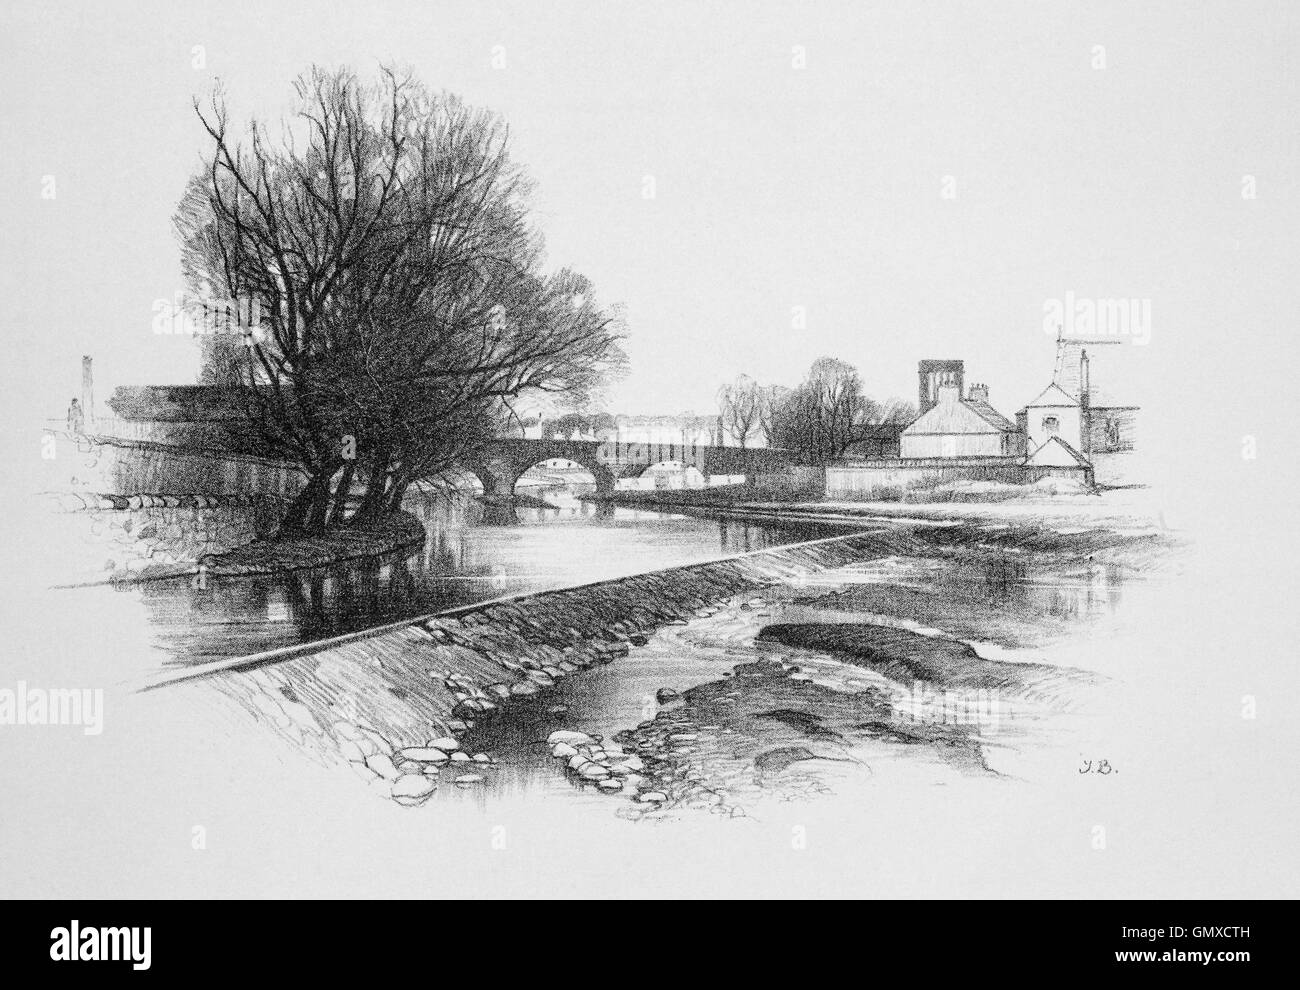 The 12th century Nungate bridge over the River Tyne in the The Royal Burgh of Haddington, a town in East Lothian, Scotland. (From 'Sketches in East Lothian' by Thomas B. Blacklock...1892) Stock Photo